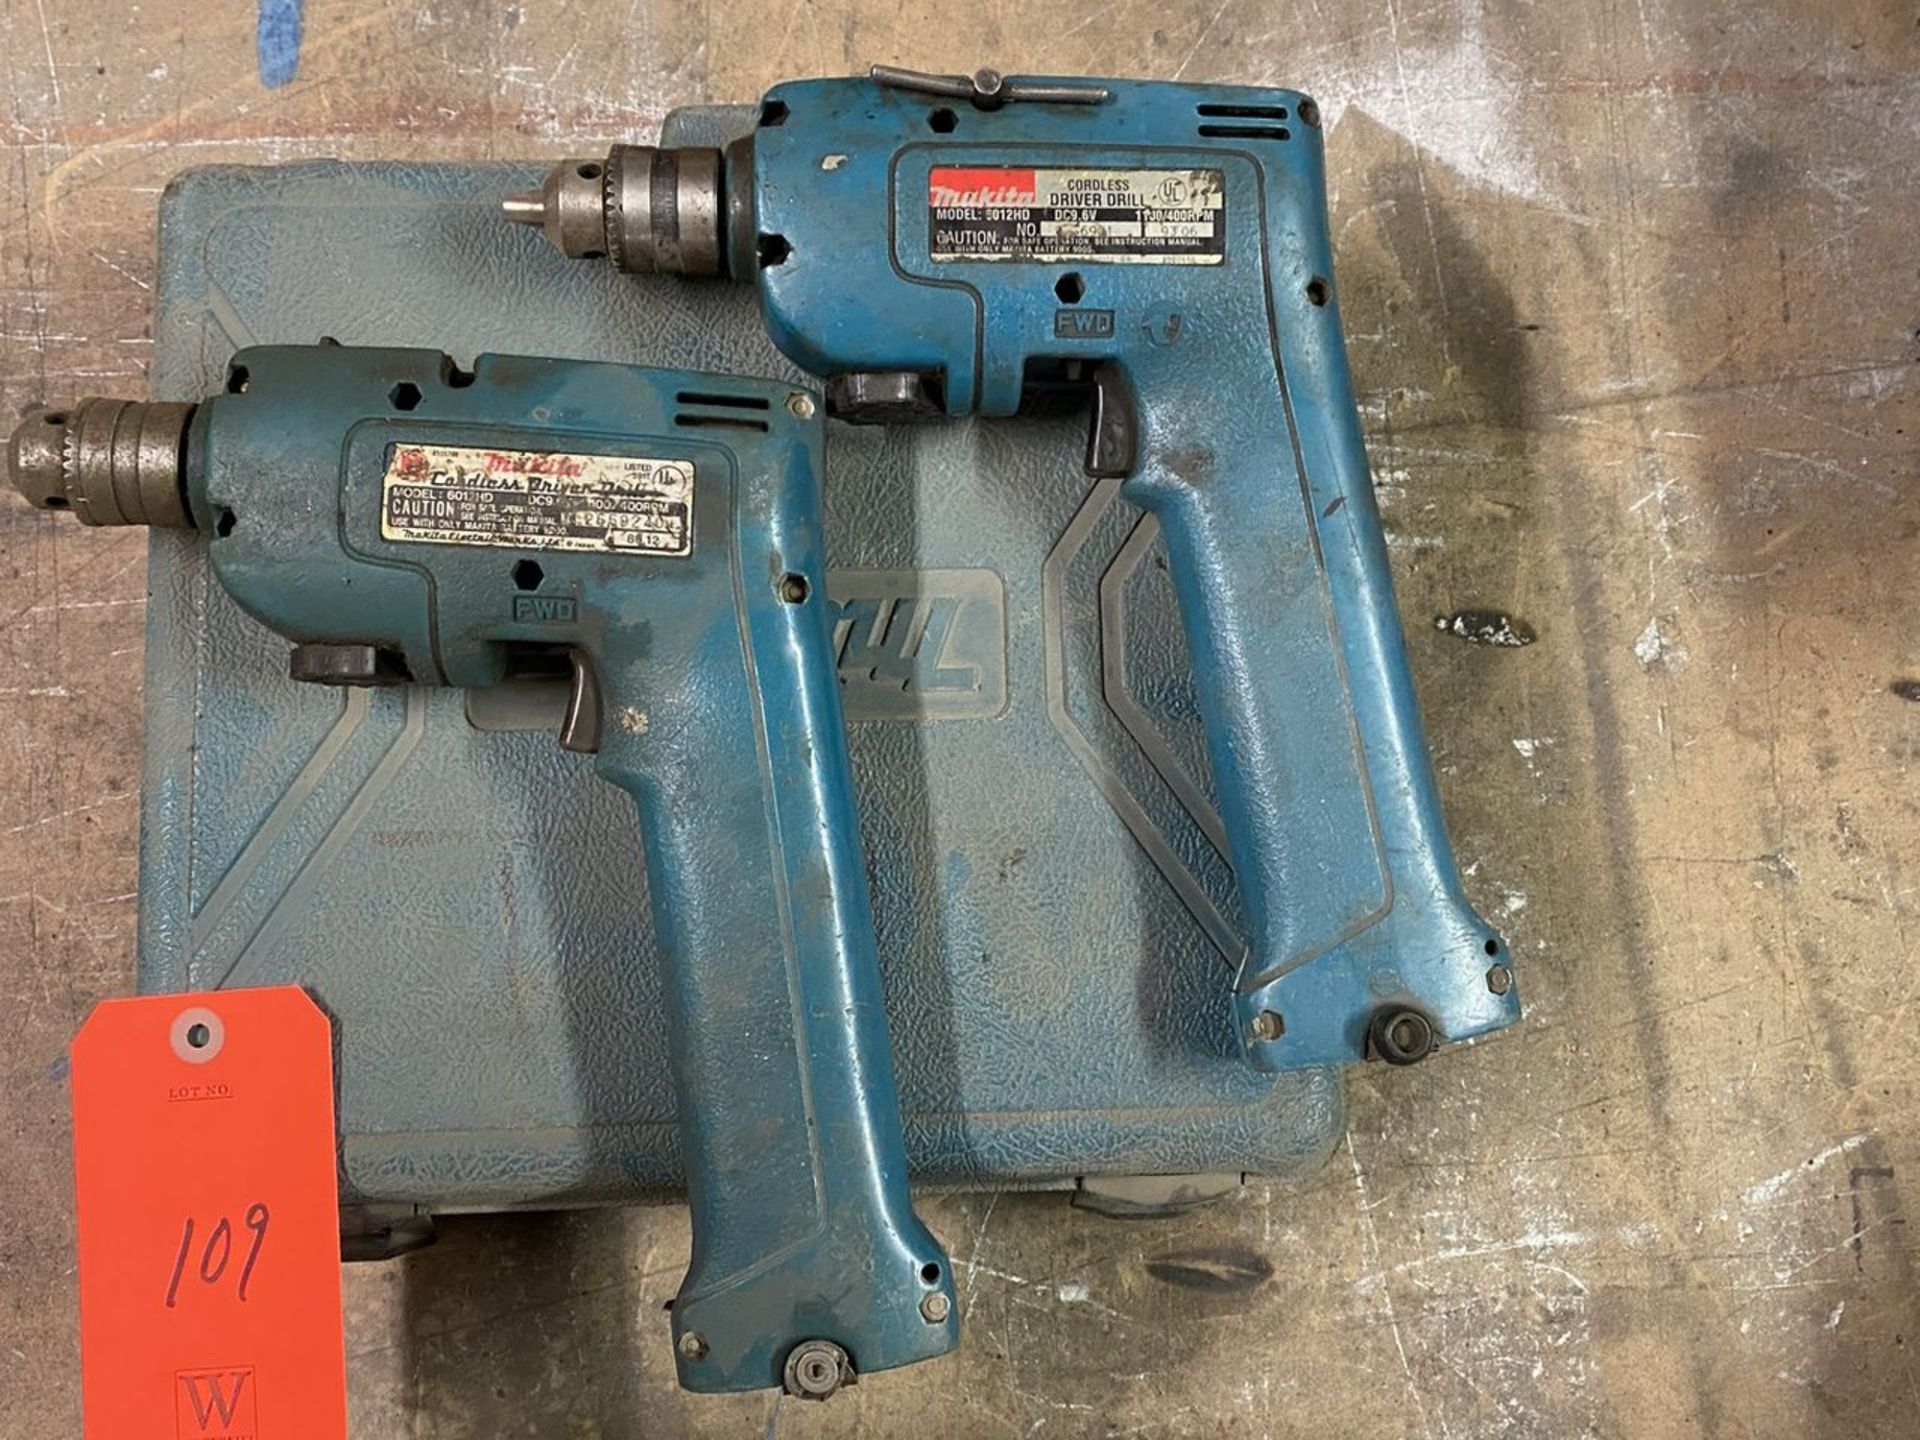 Lot - (2) Makita 3/8 in. Model 6012HD Cordless Driver Drills; 1,100/400 RPM, with Carrying Case - Image 2 of 3